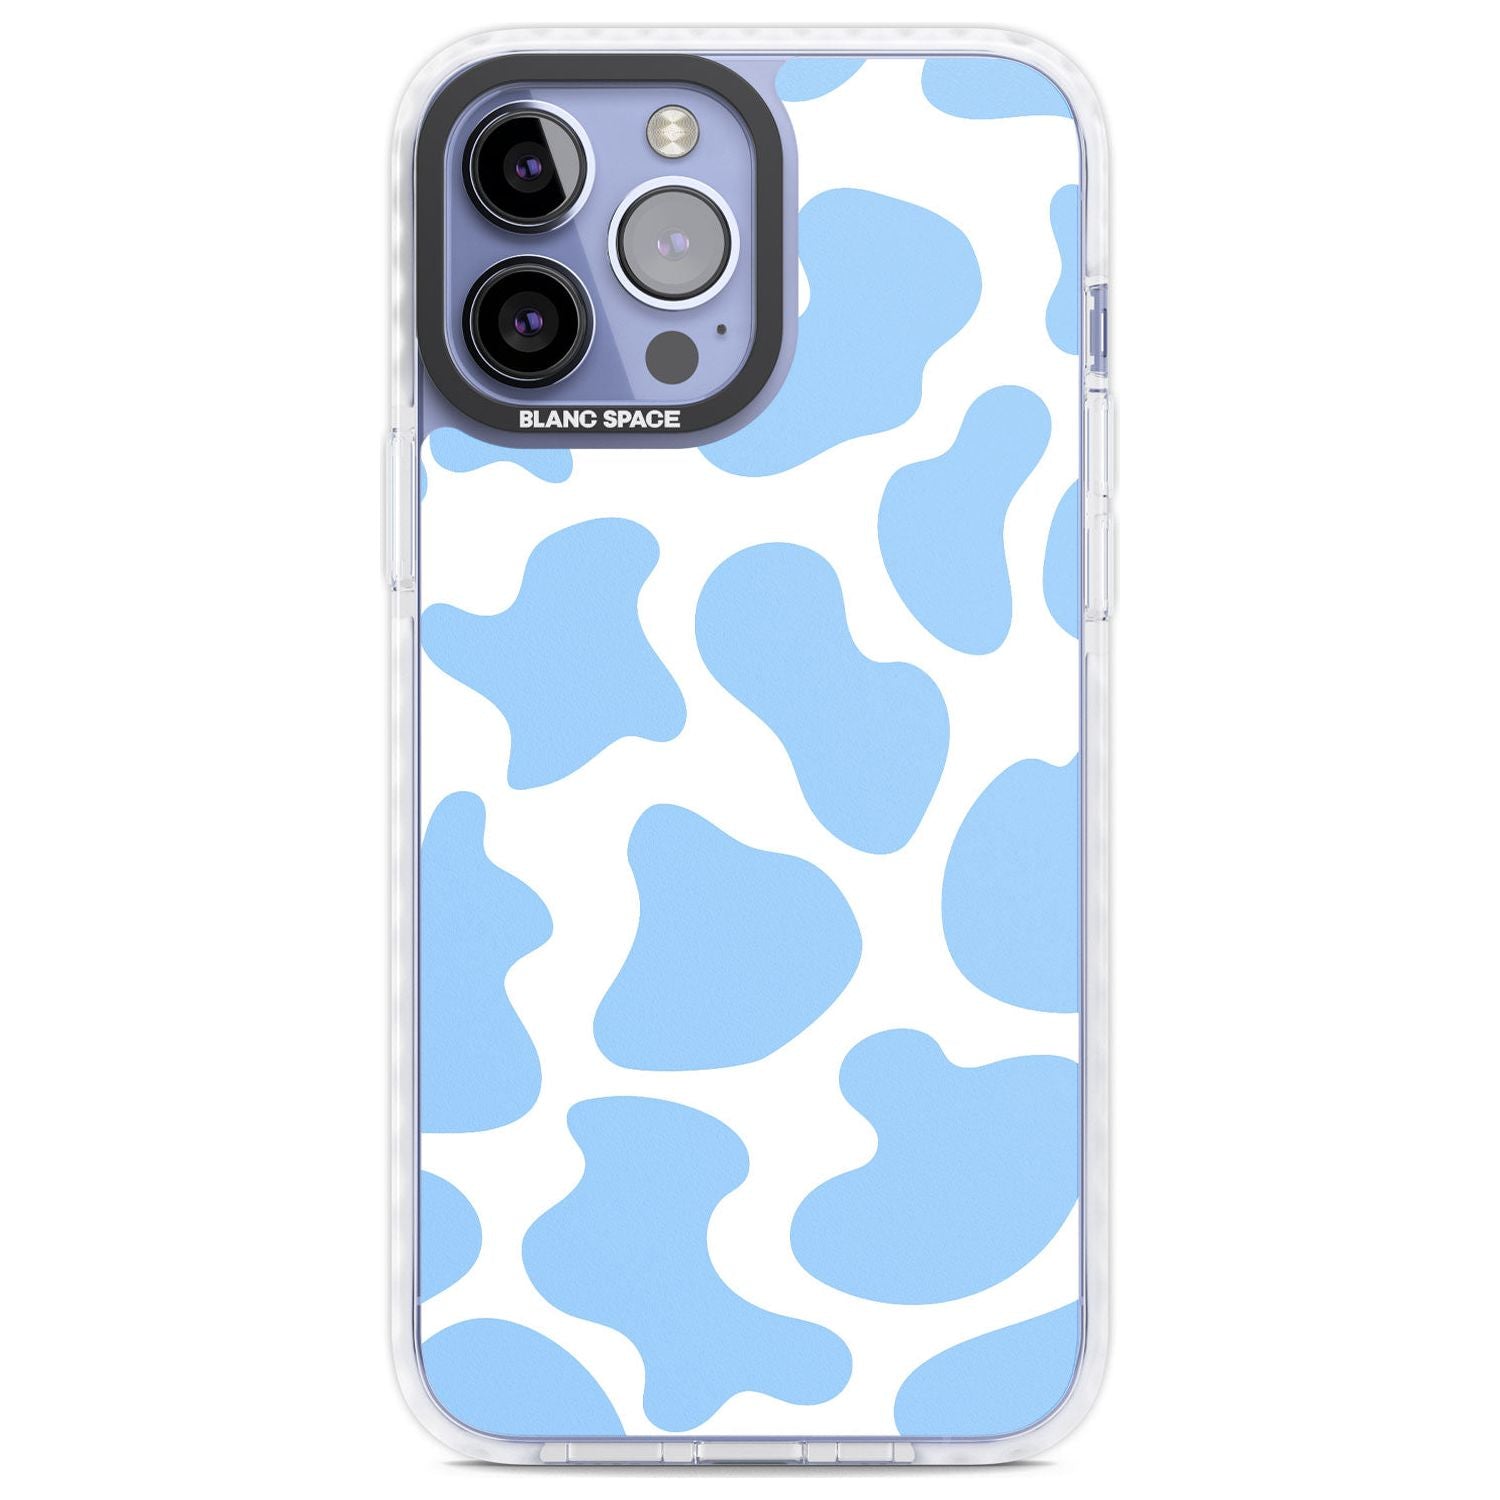 Blue and White Cow Print Phone Case iPhone 13 Pro Max / Impact Case,iPhone 14 Pro Max / Impact Case Blanc Space